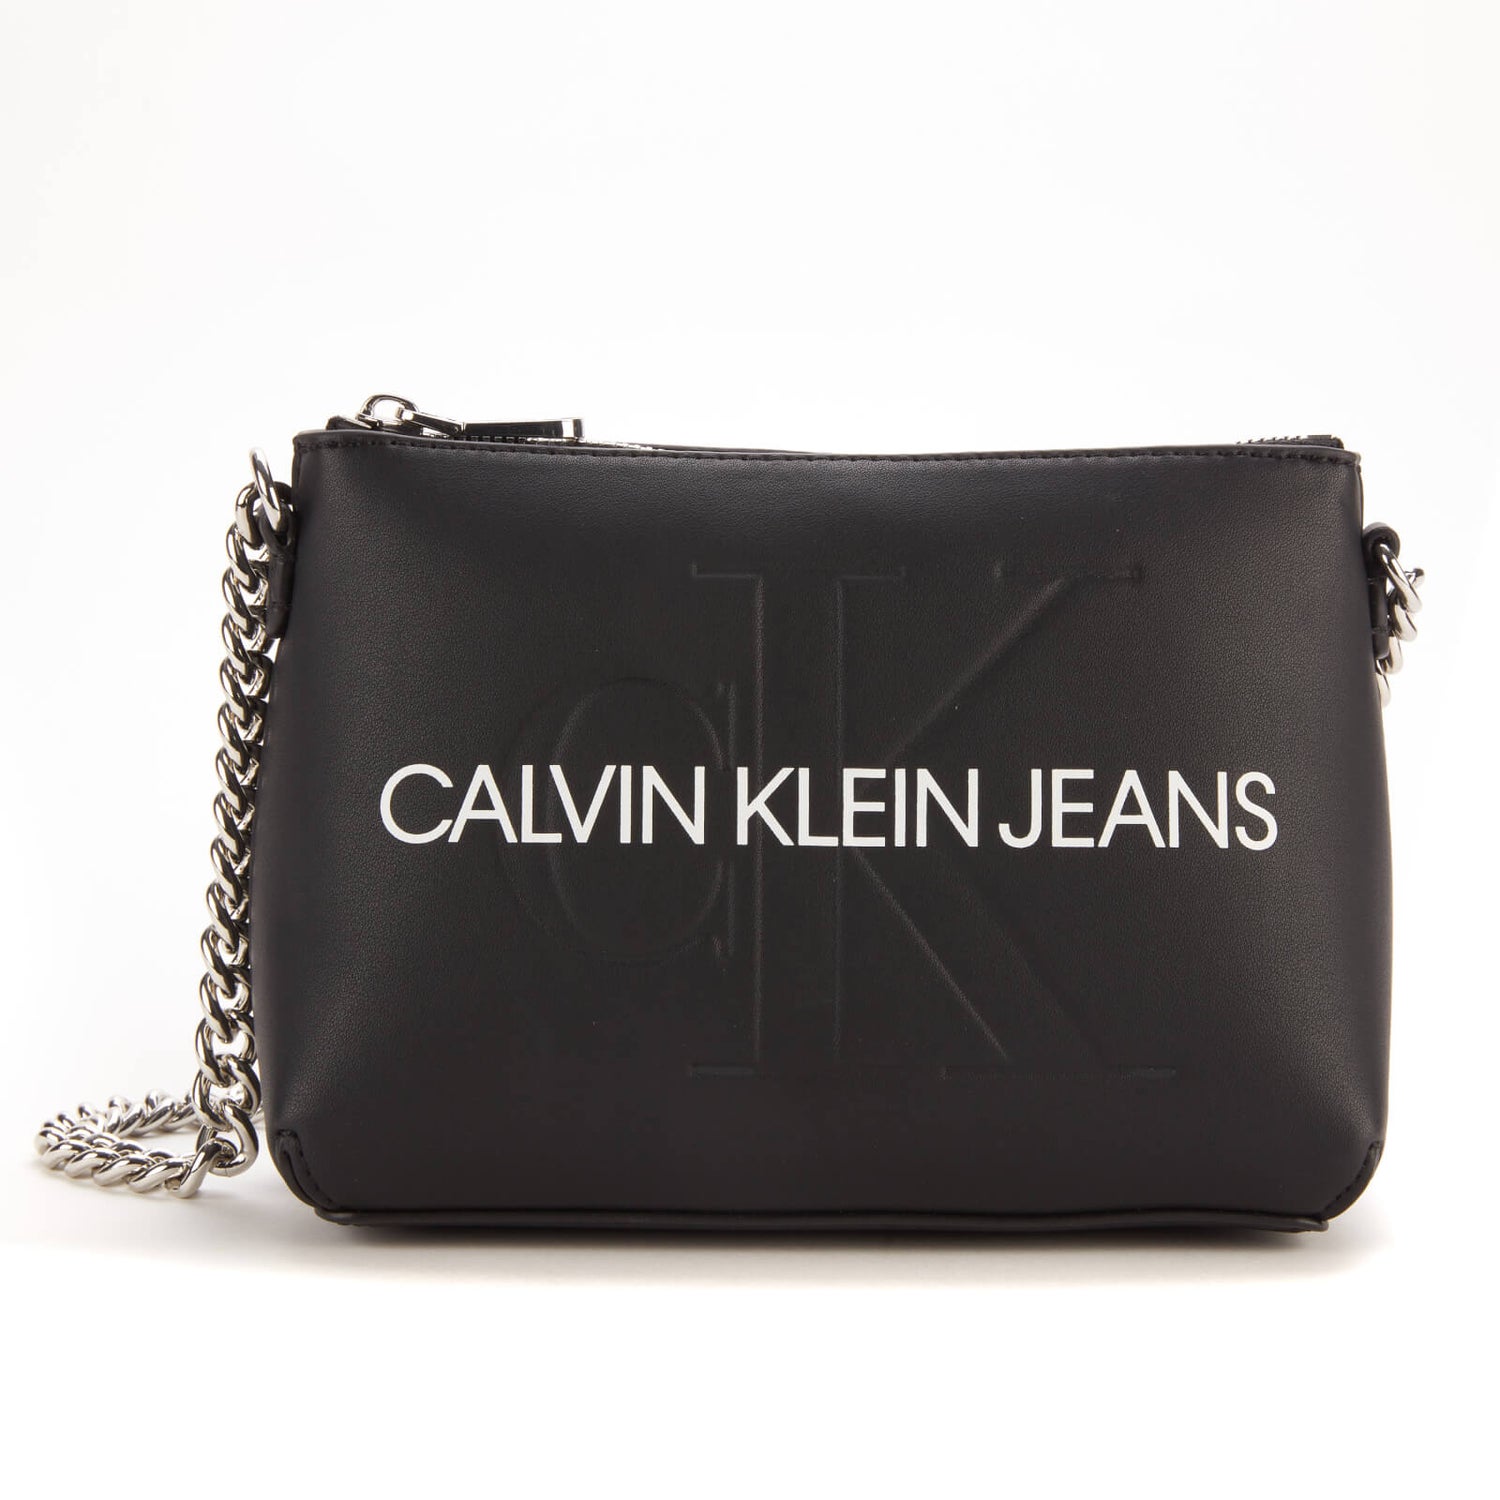 Calvin Klein Jeans Women's Camera Pouch with Chain - Black